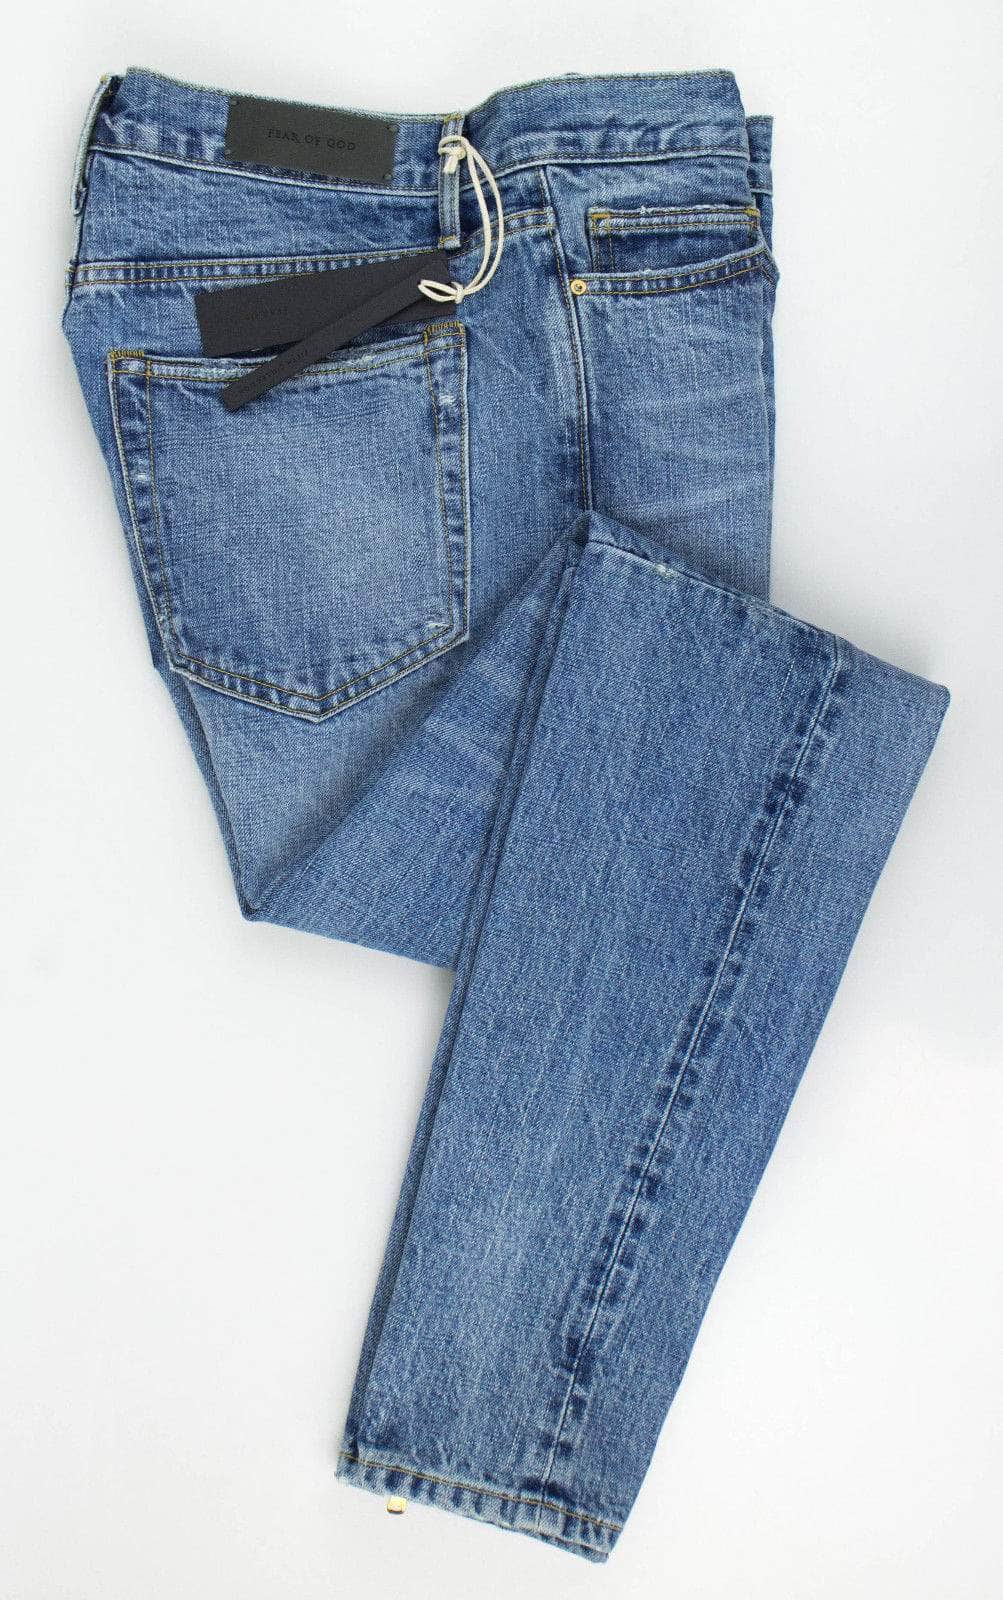 Fear Of God 250-500, channelenable-all, chicmi, couponcollection, fear-of-god, gender-mens, main-clothing, mens-shoes, mens-slim-fit-jeans, shop375, Stadium Goods 29 Fifth Collection' Cotton Denim Slim-Fit Jeans 54LE-1151/29 54LE-1151/29